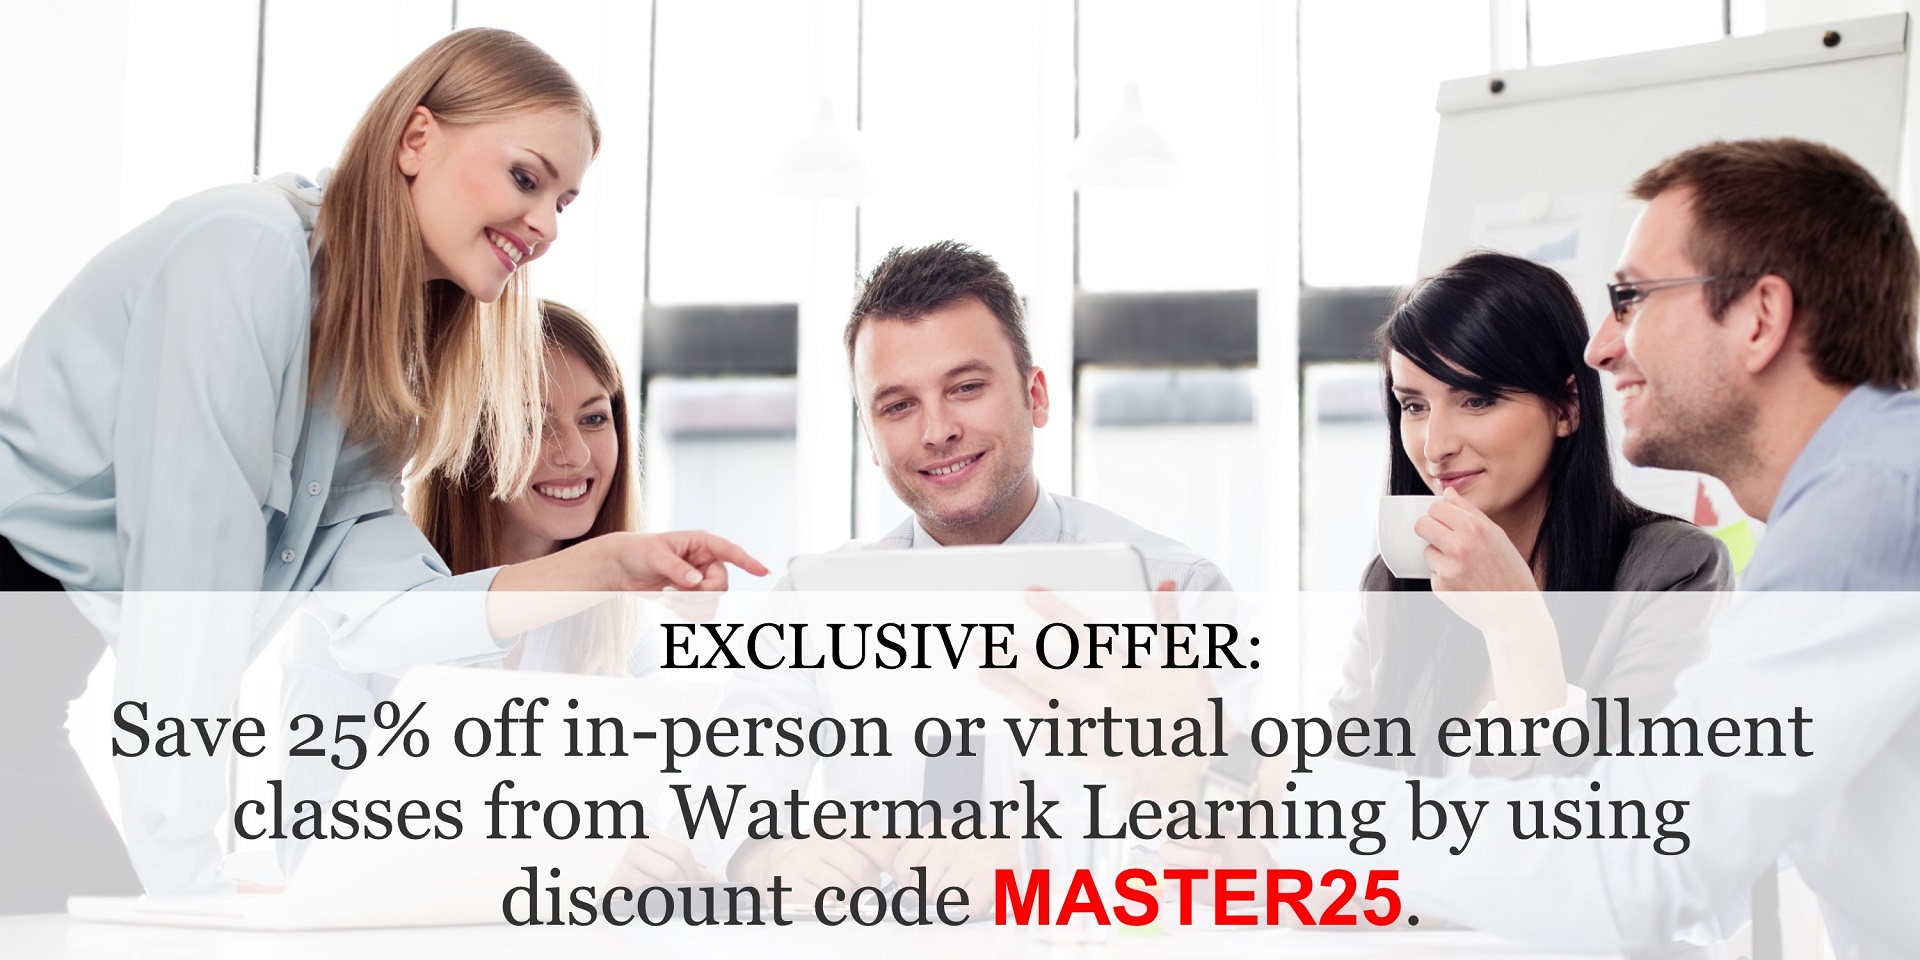 Get great in-person or online training from ASPE and save 25% using coupon code MBA25